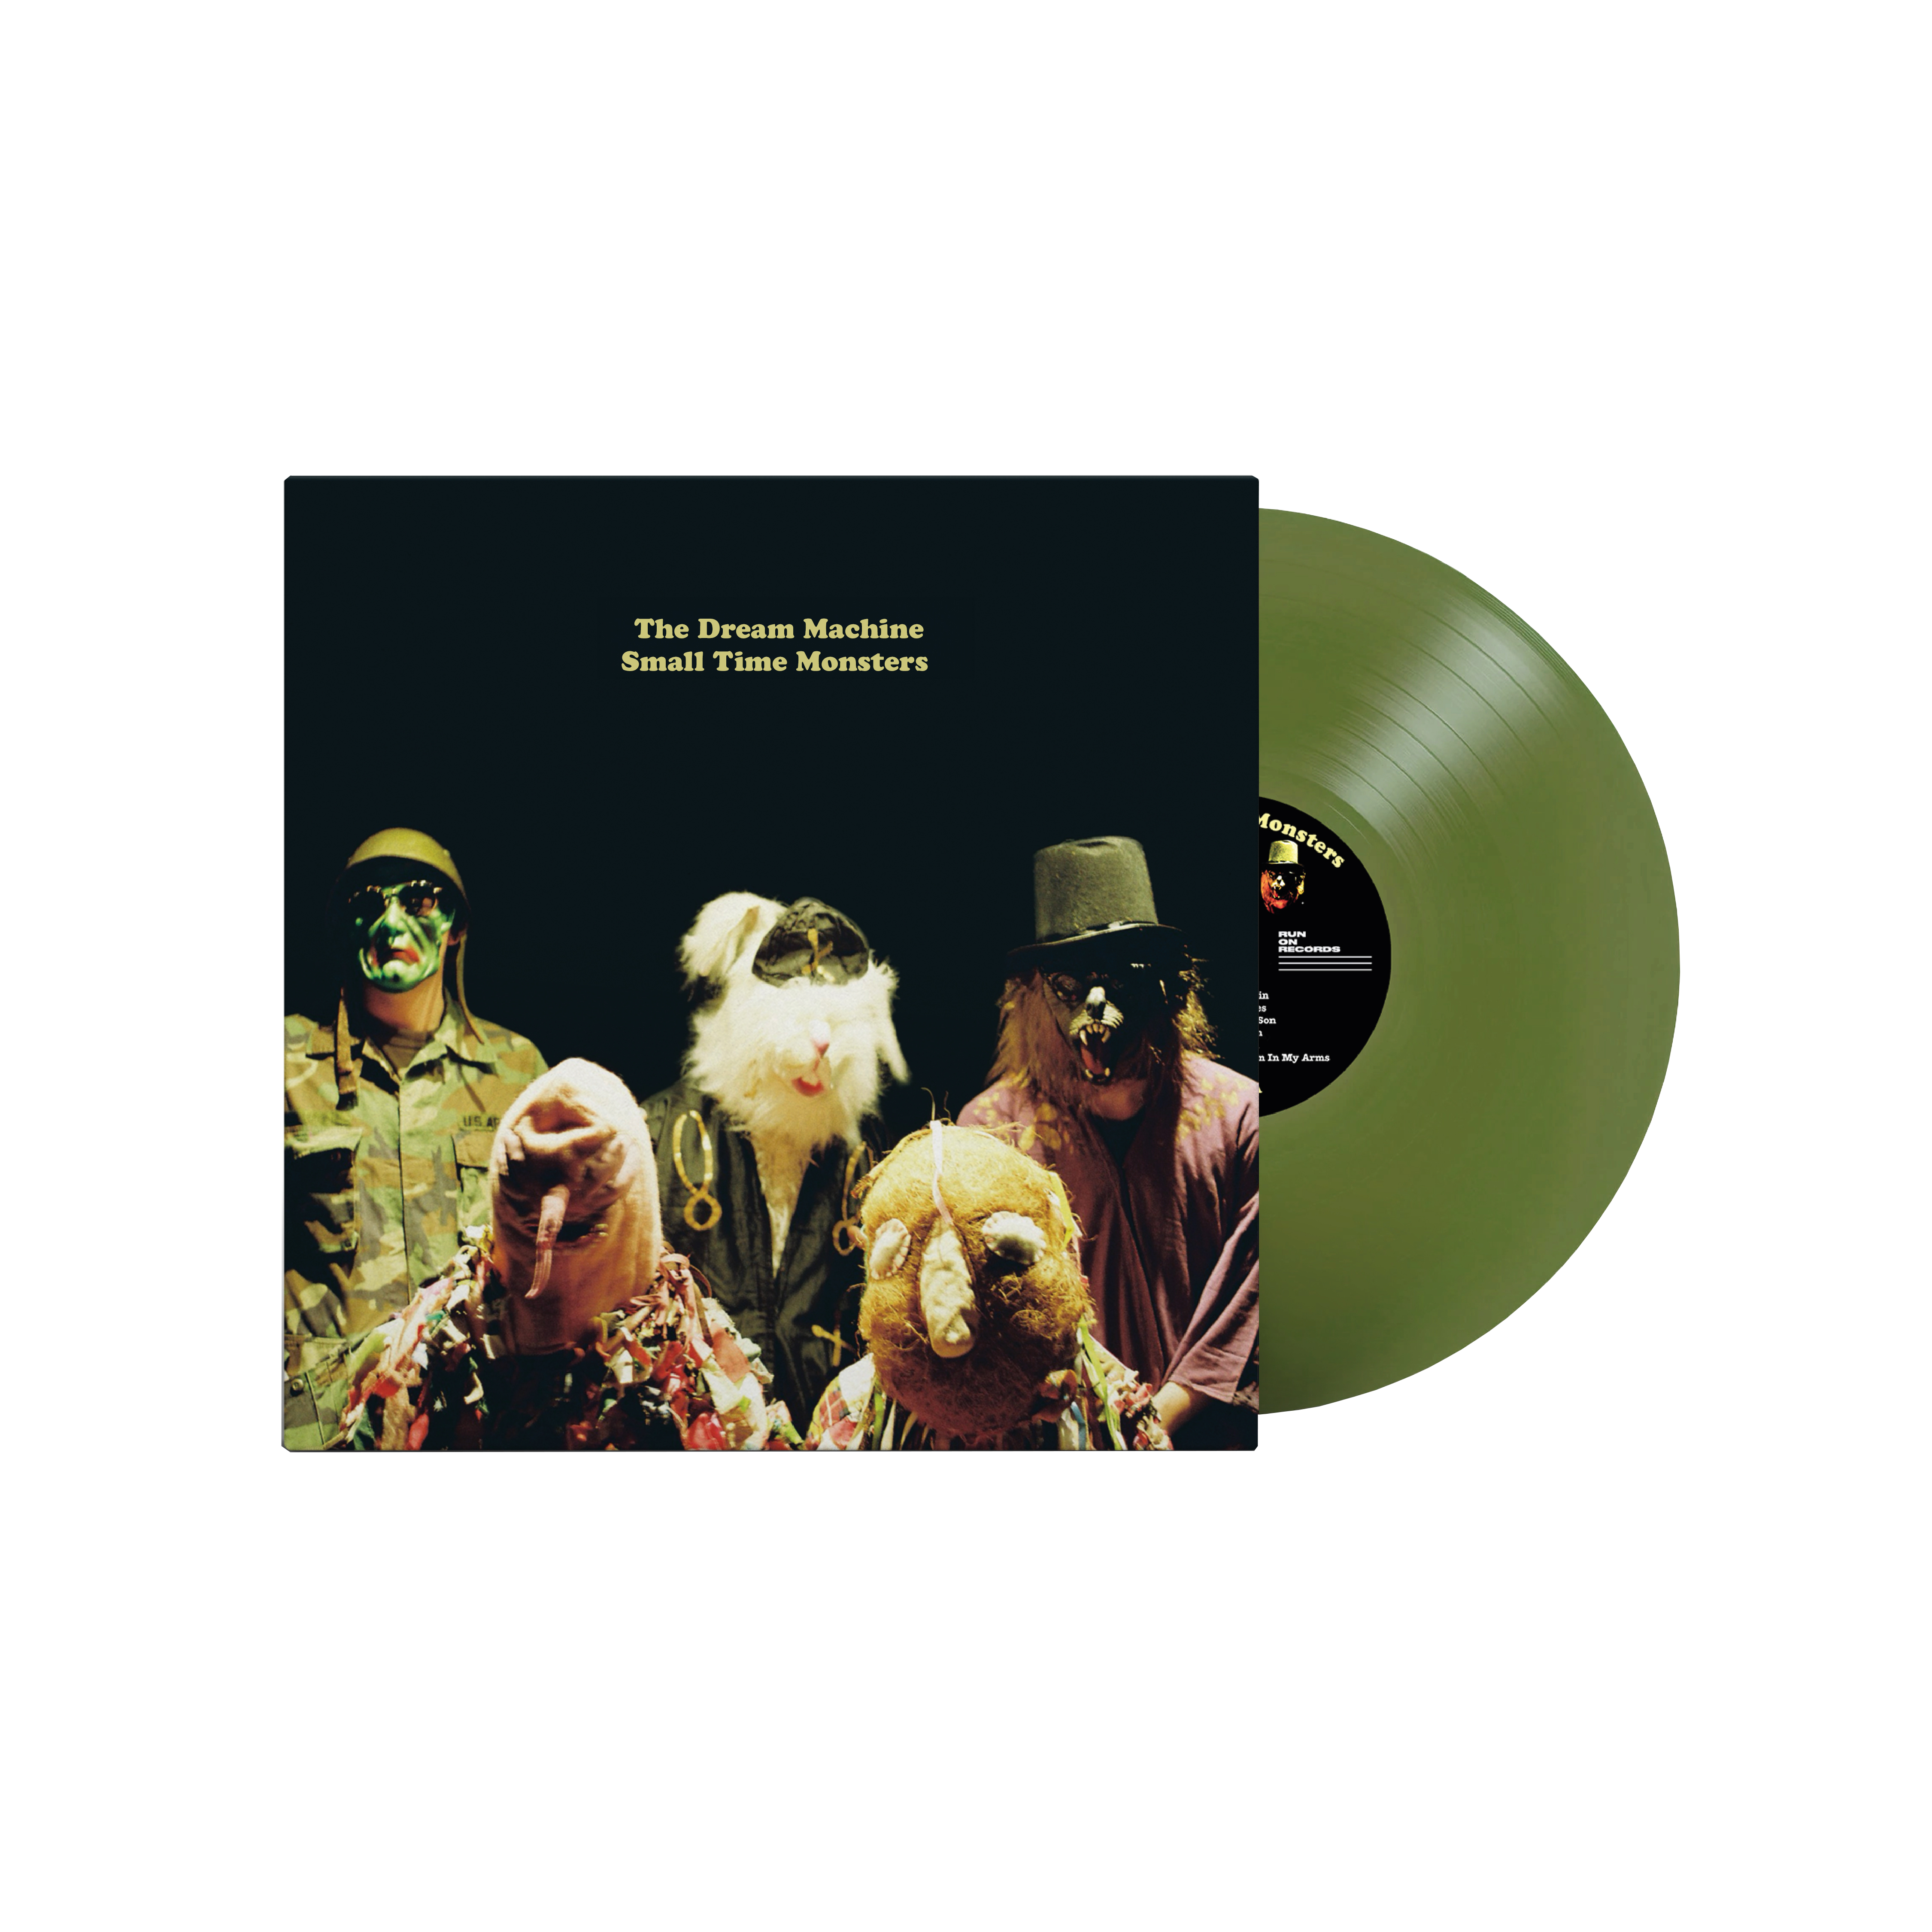 Small Time Monsters: Limited Green Vinyl LP + Signed Print